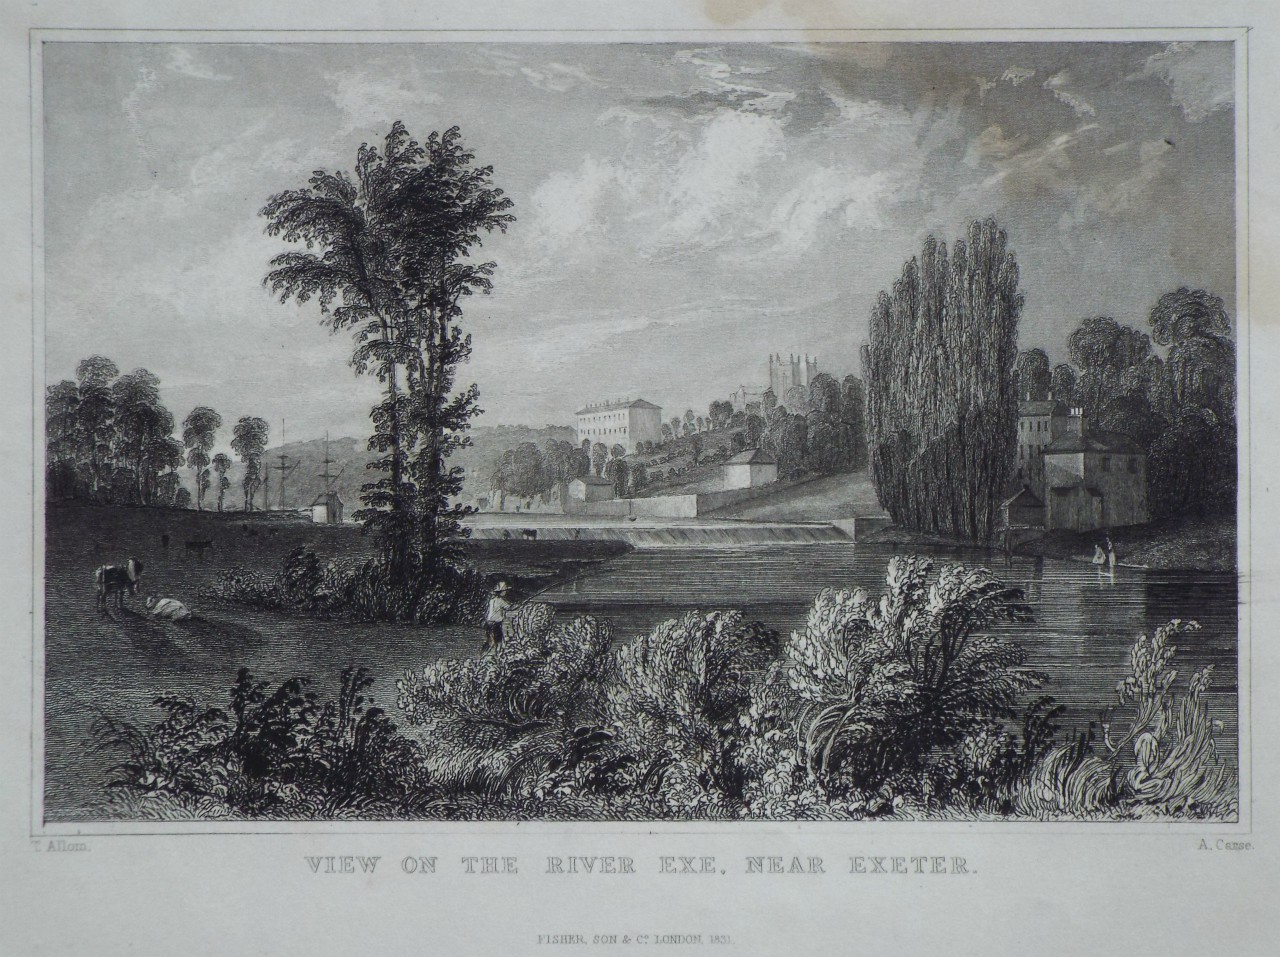 Print - View on the River Exe, near Exeter. - Cause